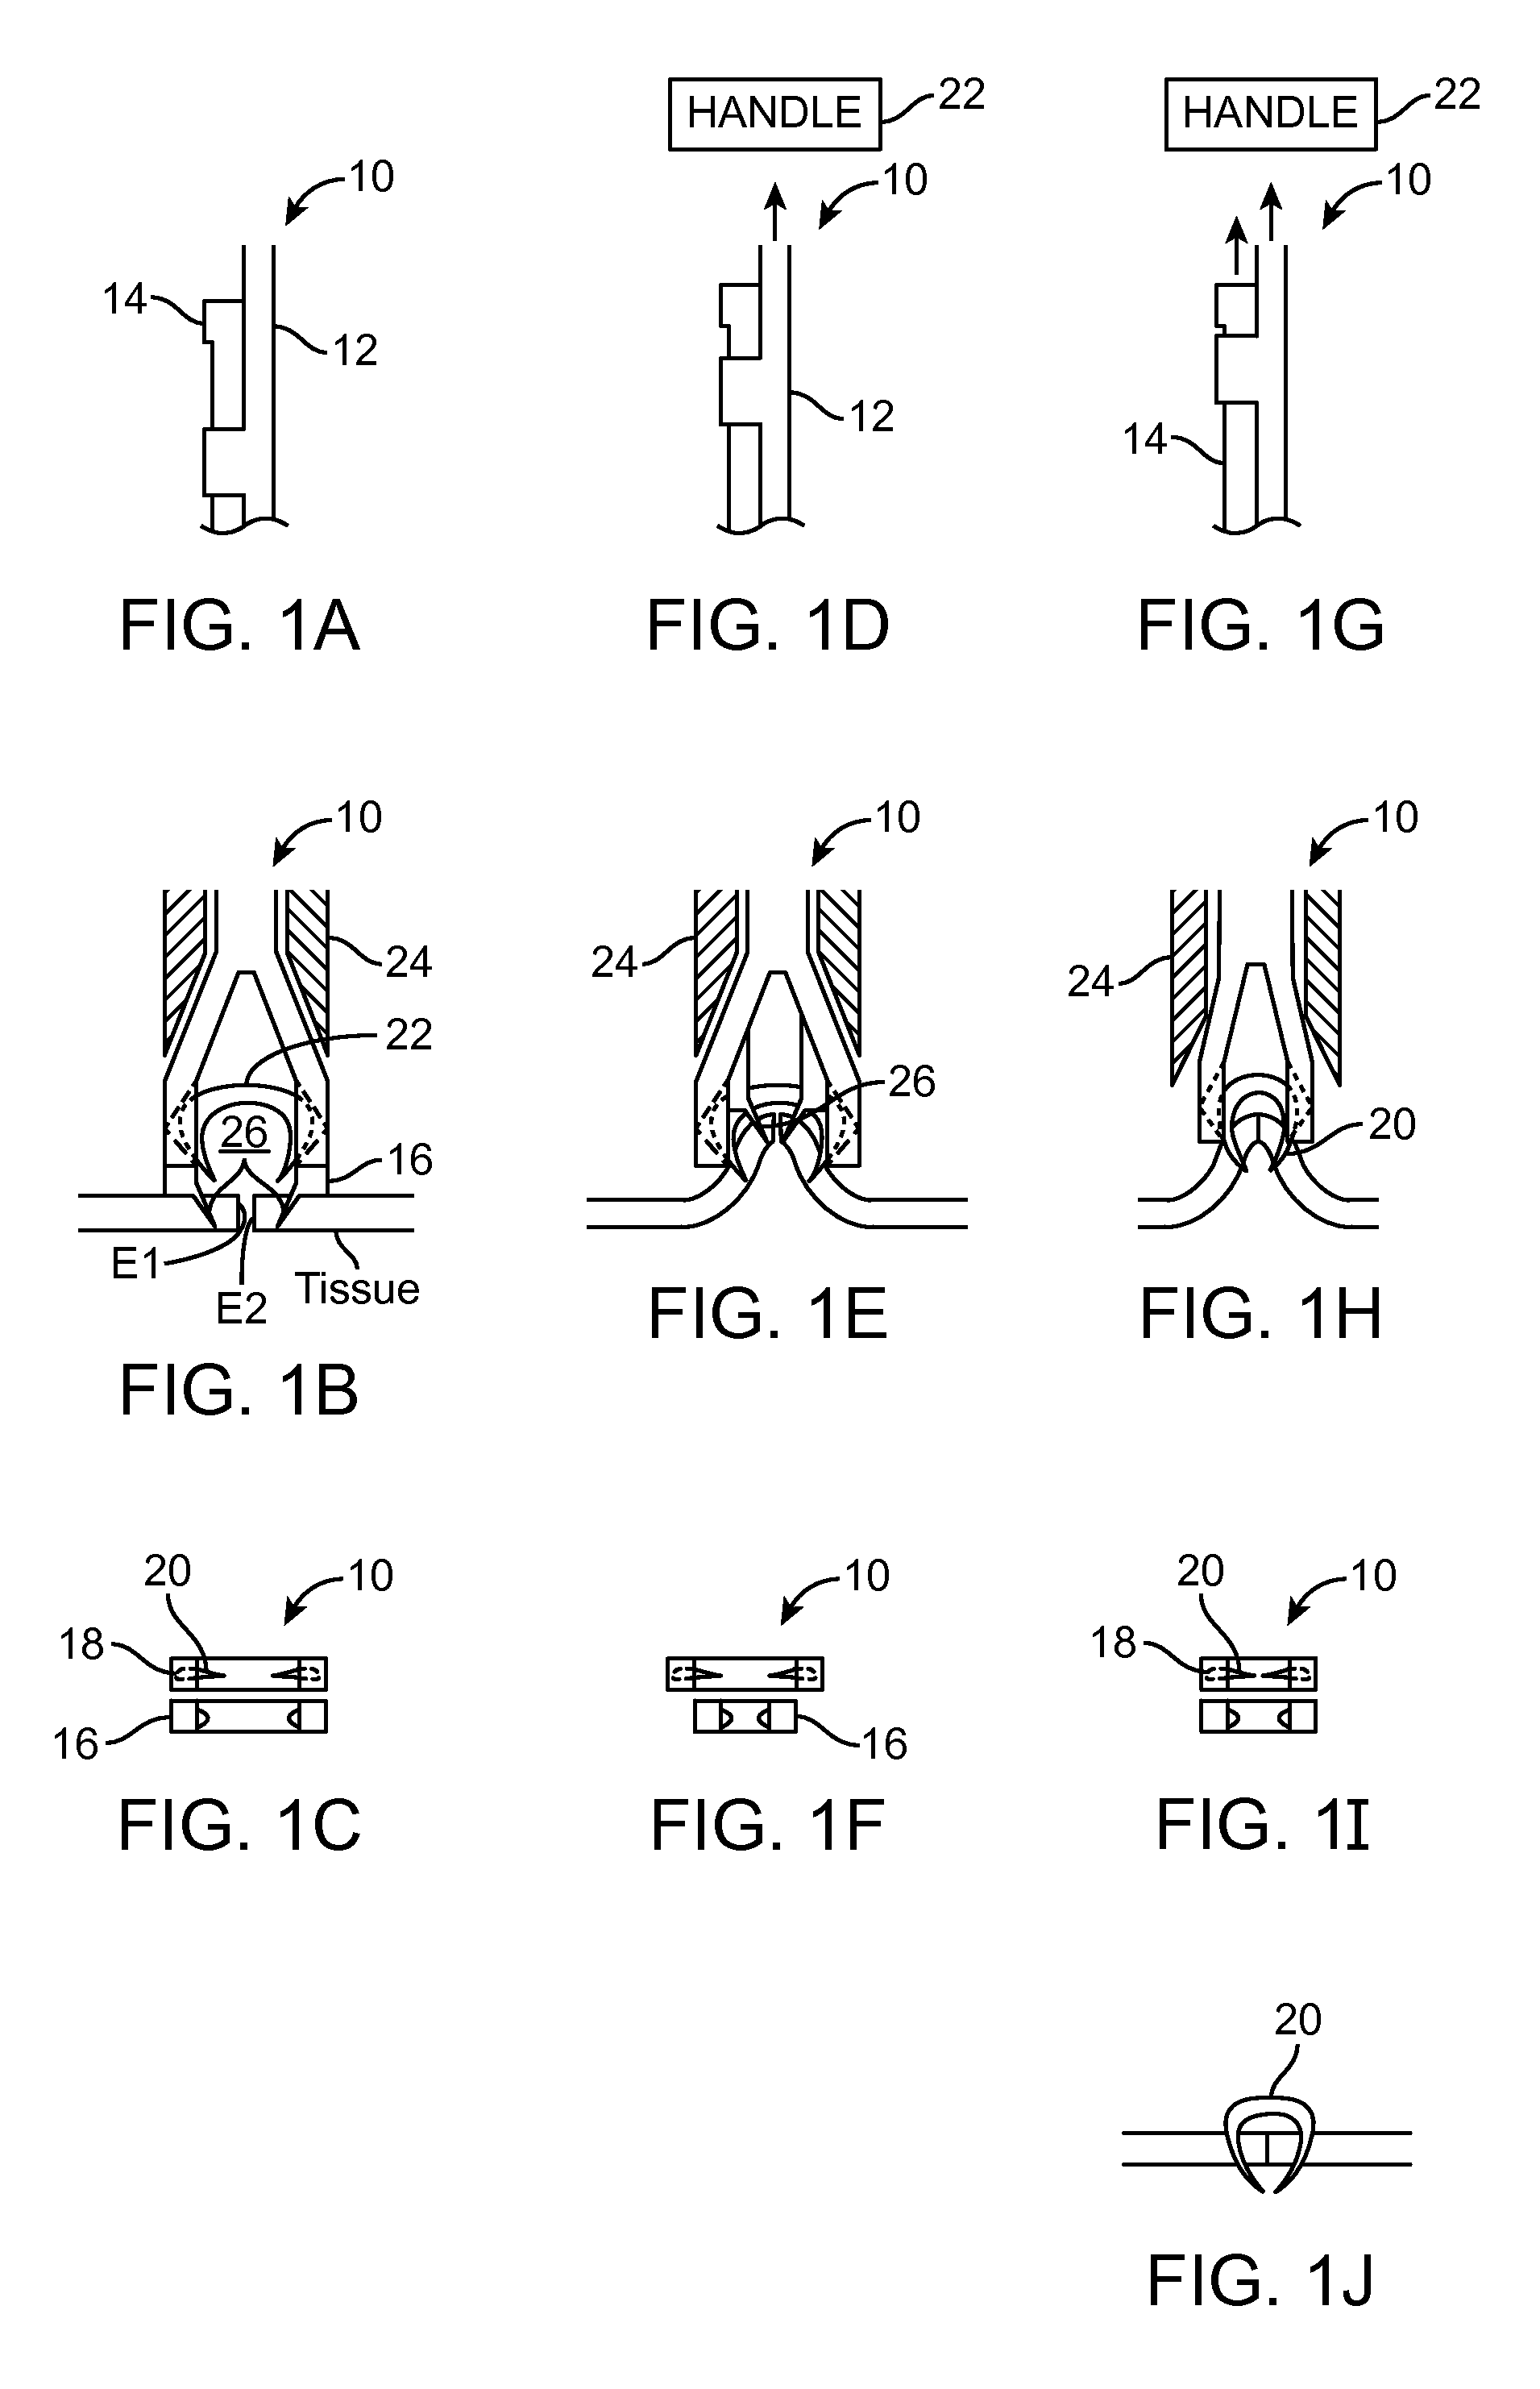 Fasteners, deployment systems, and methods for ophthalmic tissue closure and fixation of ophthalmic prostheses and other uses